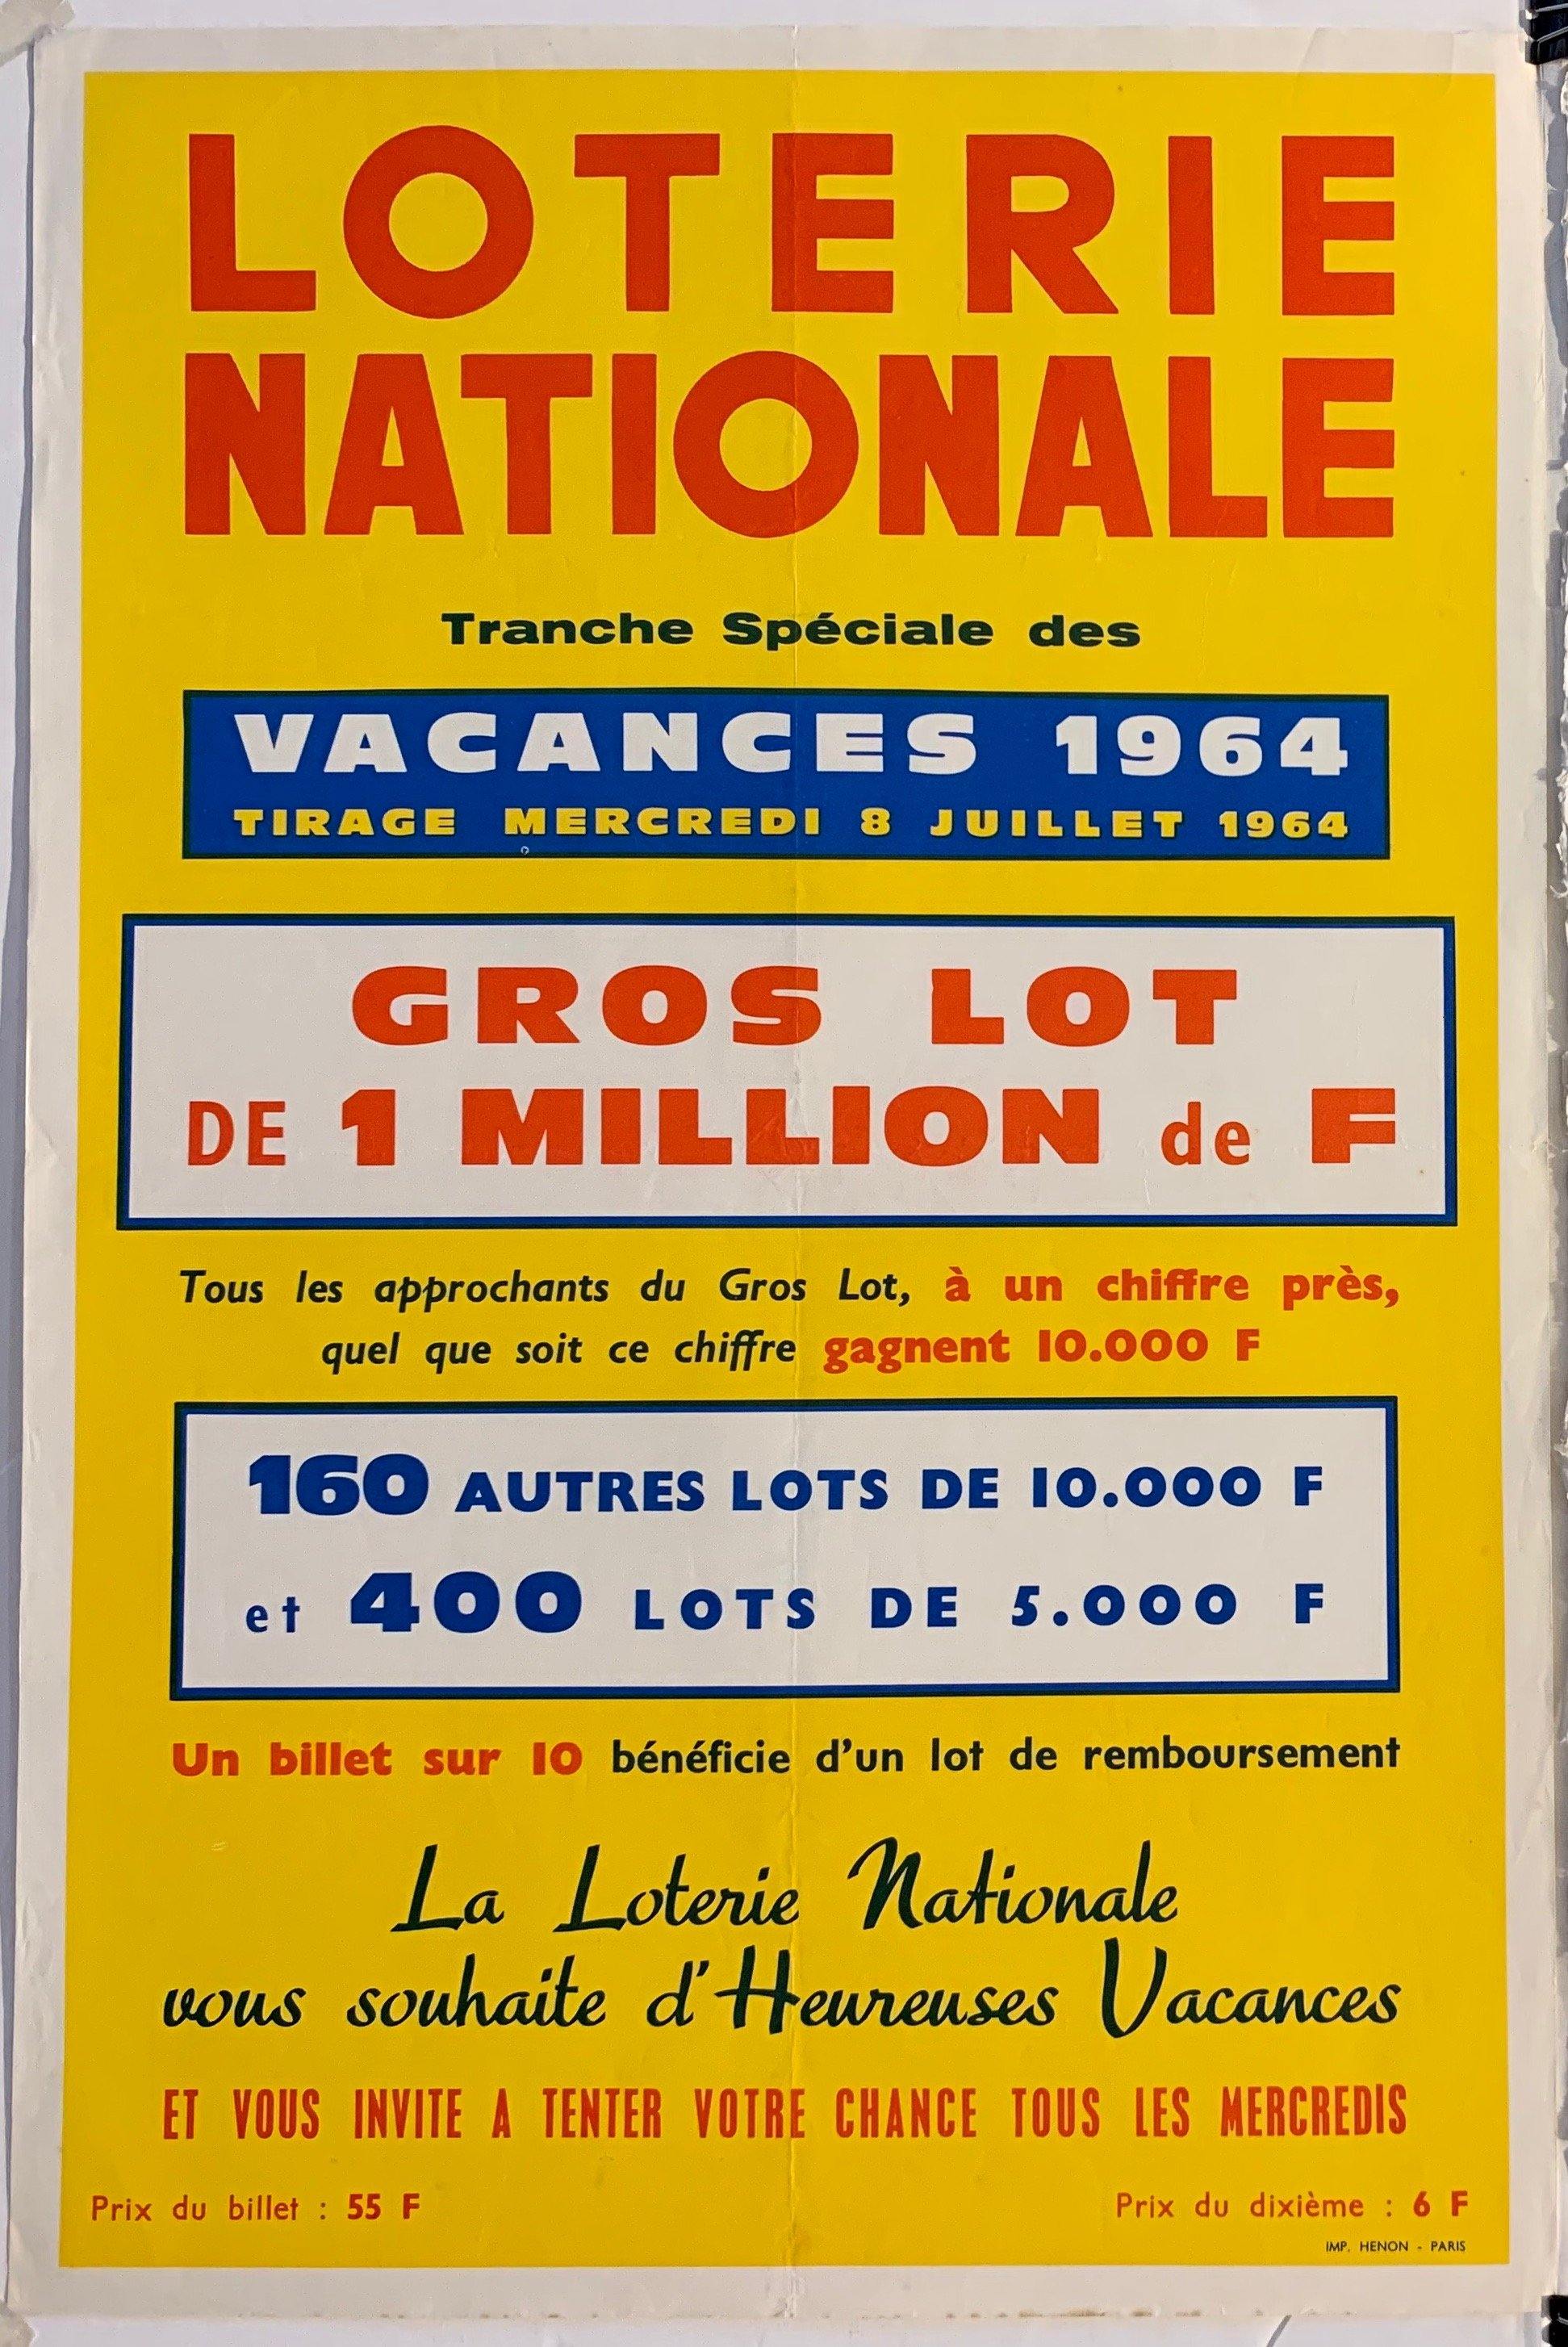 loterie nationale - Poster Museum